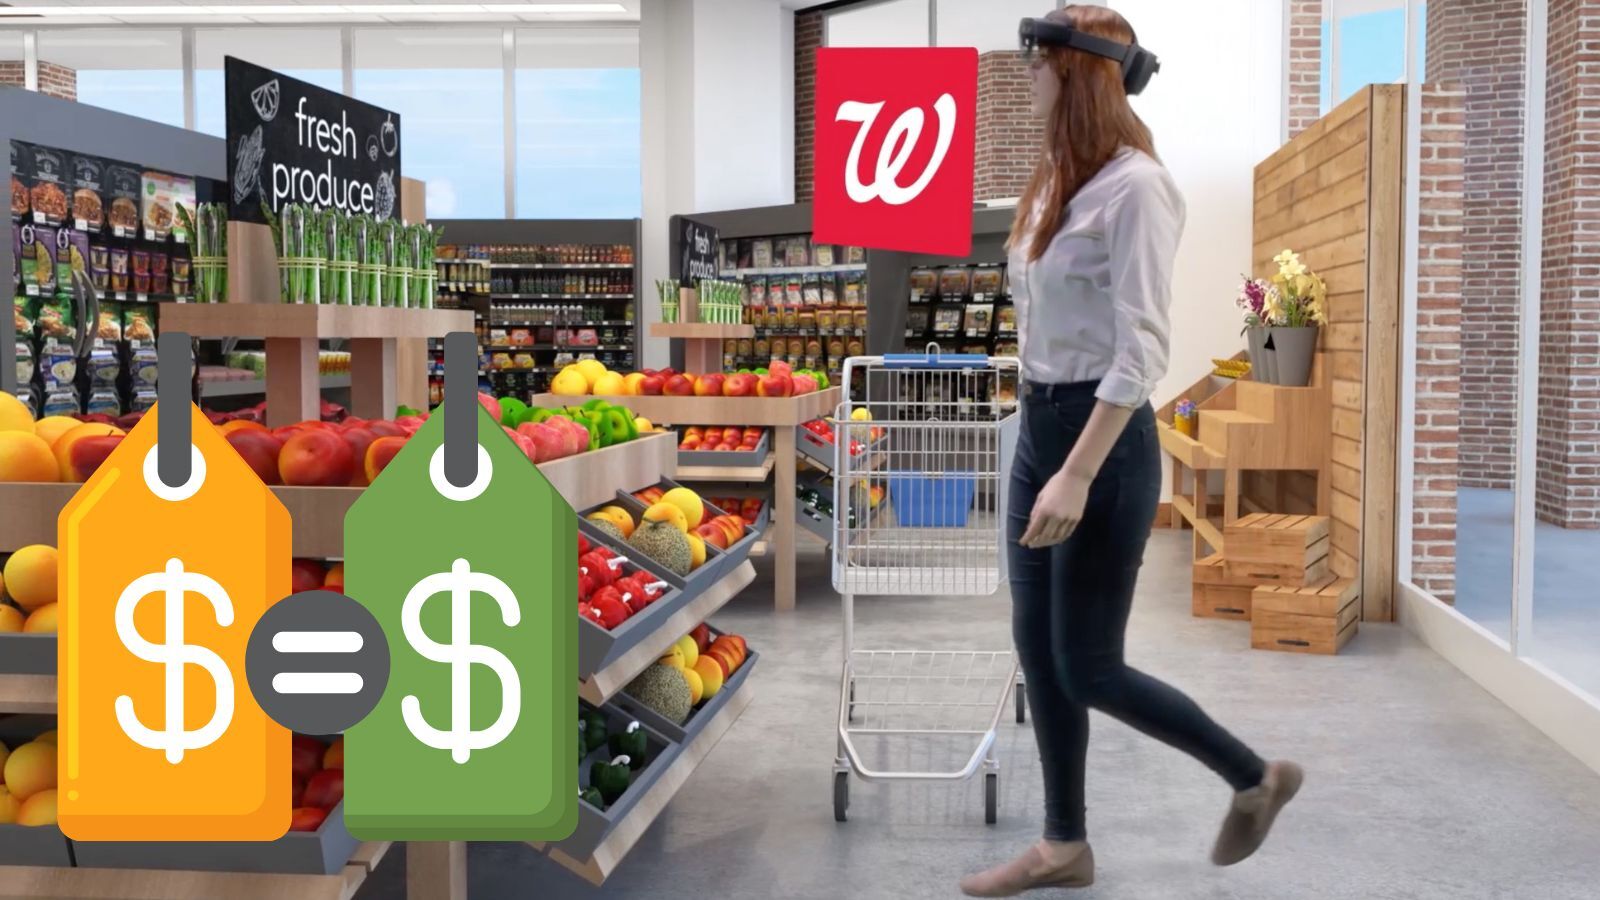 Does Walgreens Price Match? (A Full Guide)